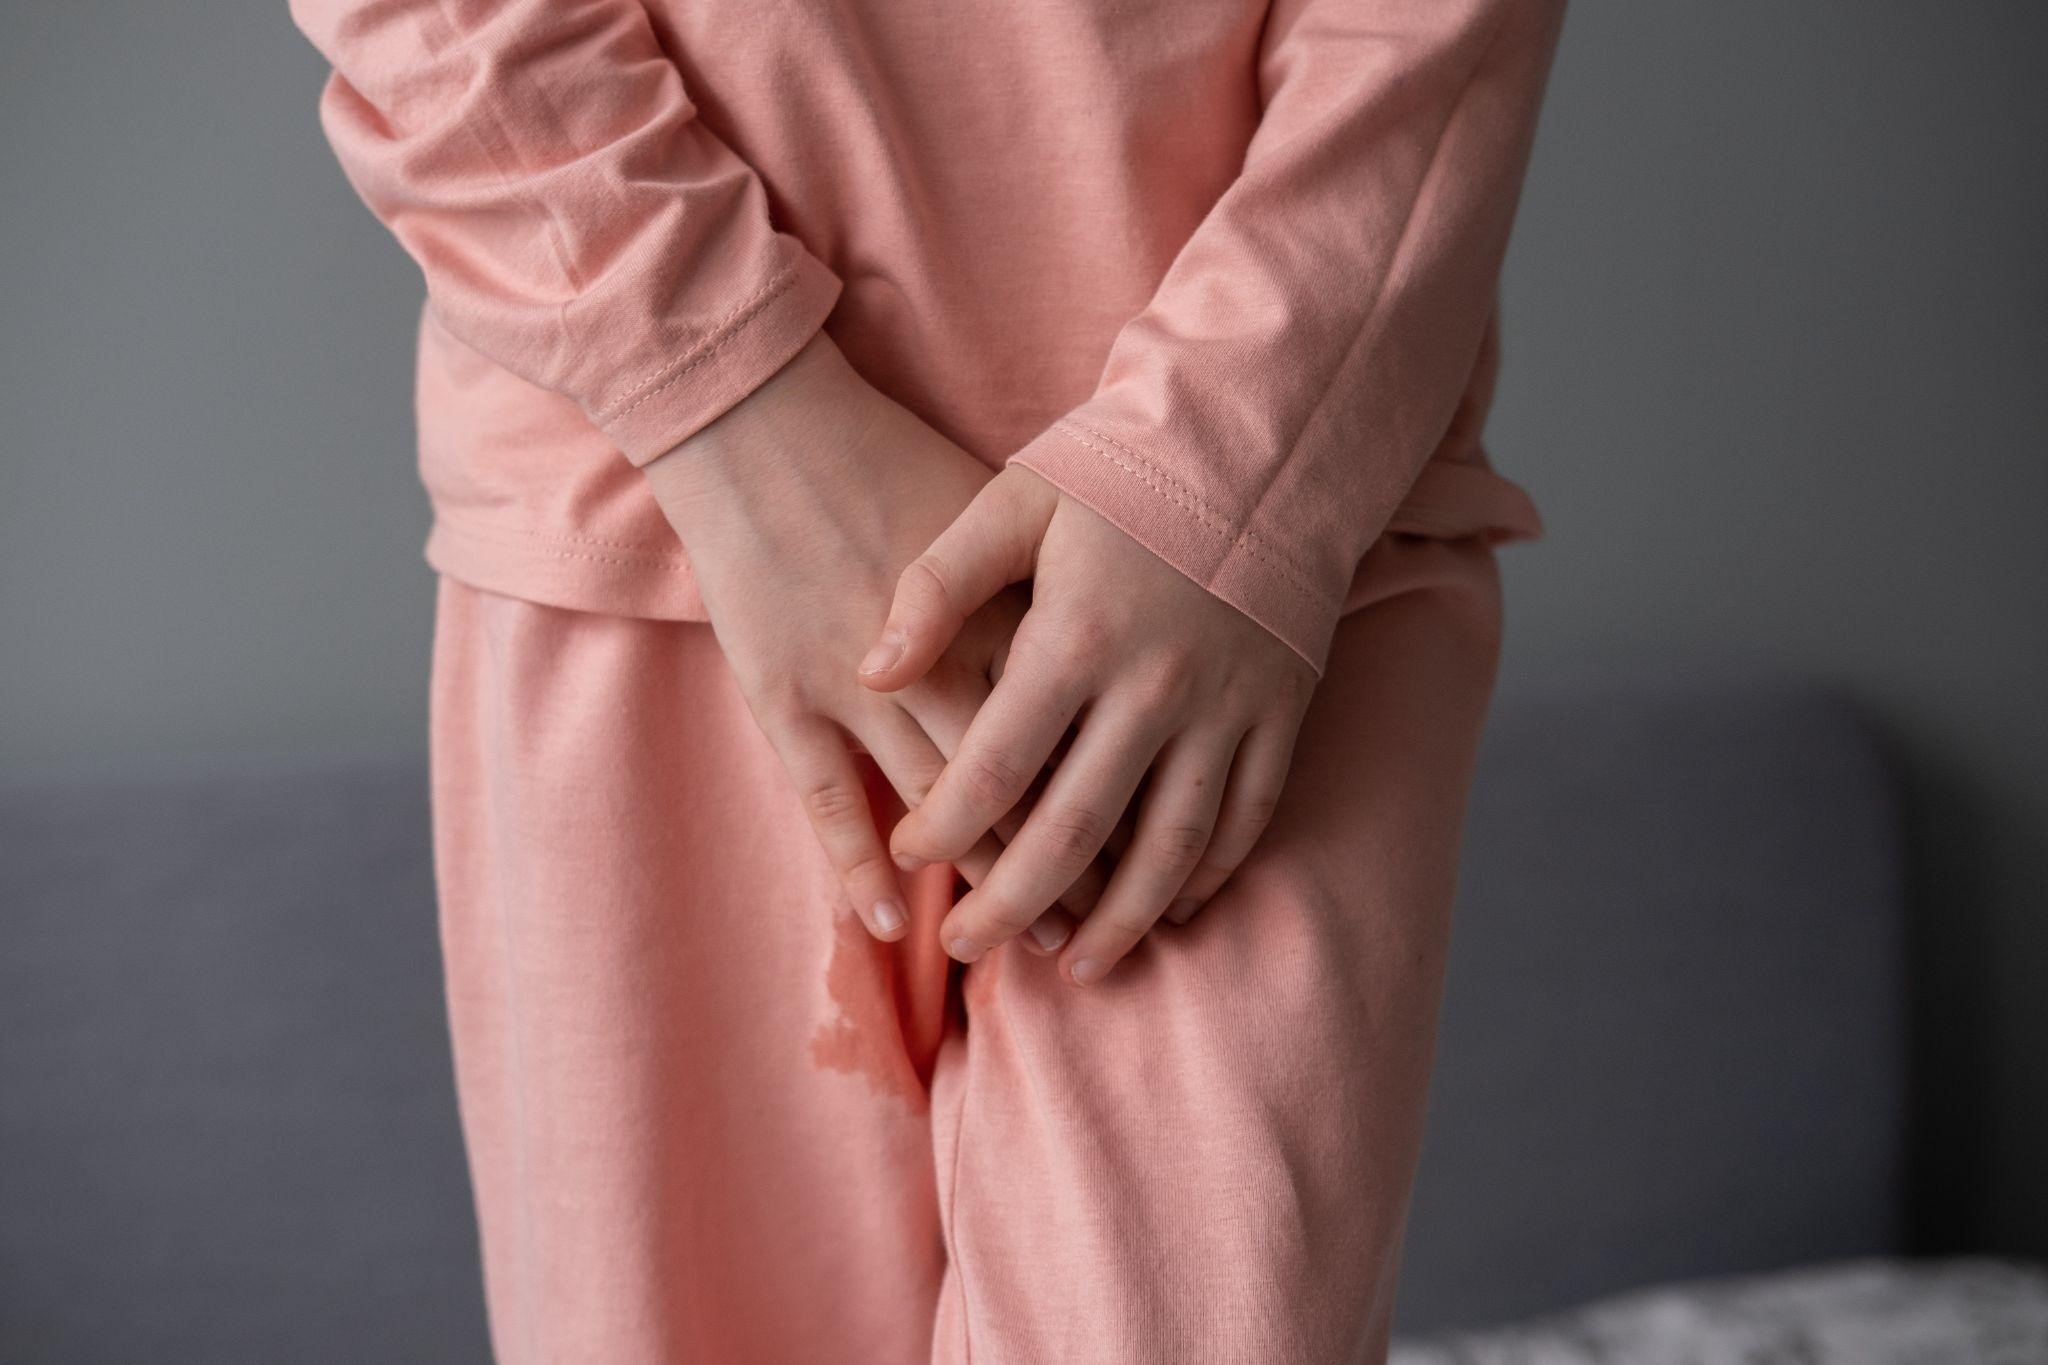 Urinary Incontinence: Dealing with the frequent urge to pee